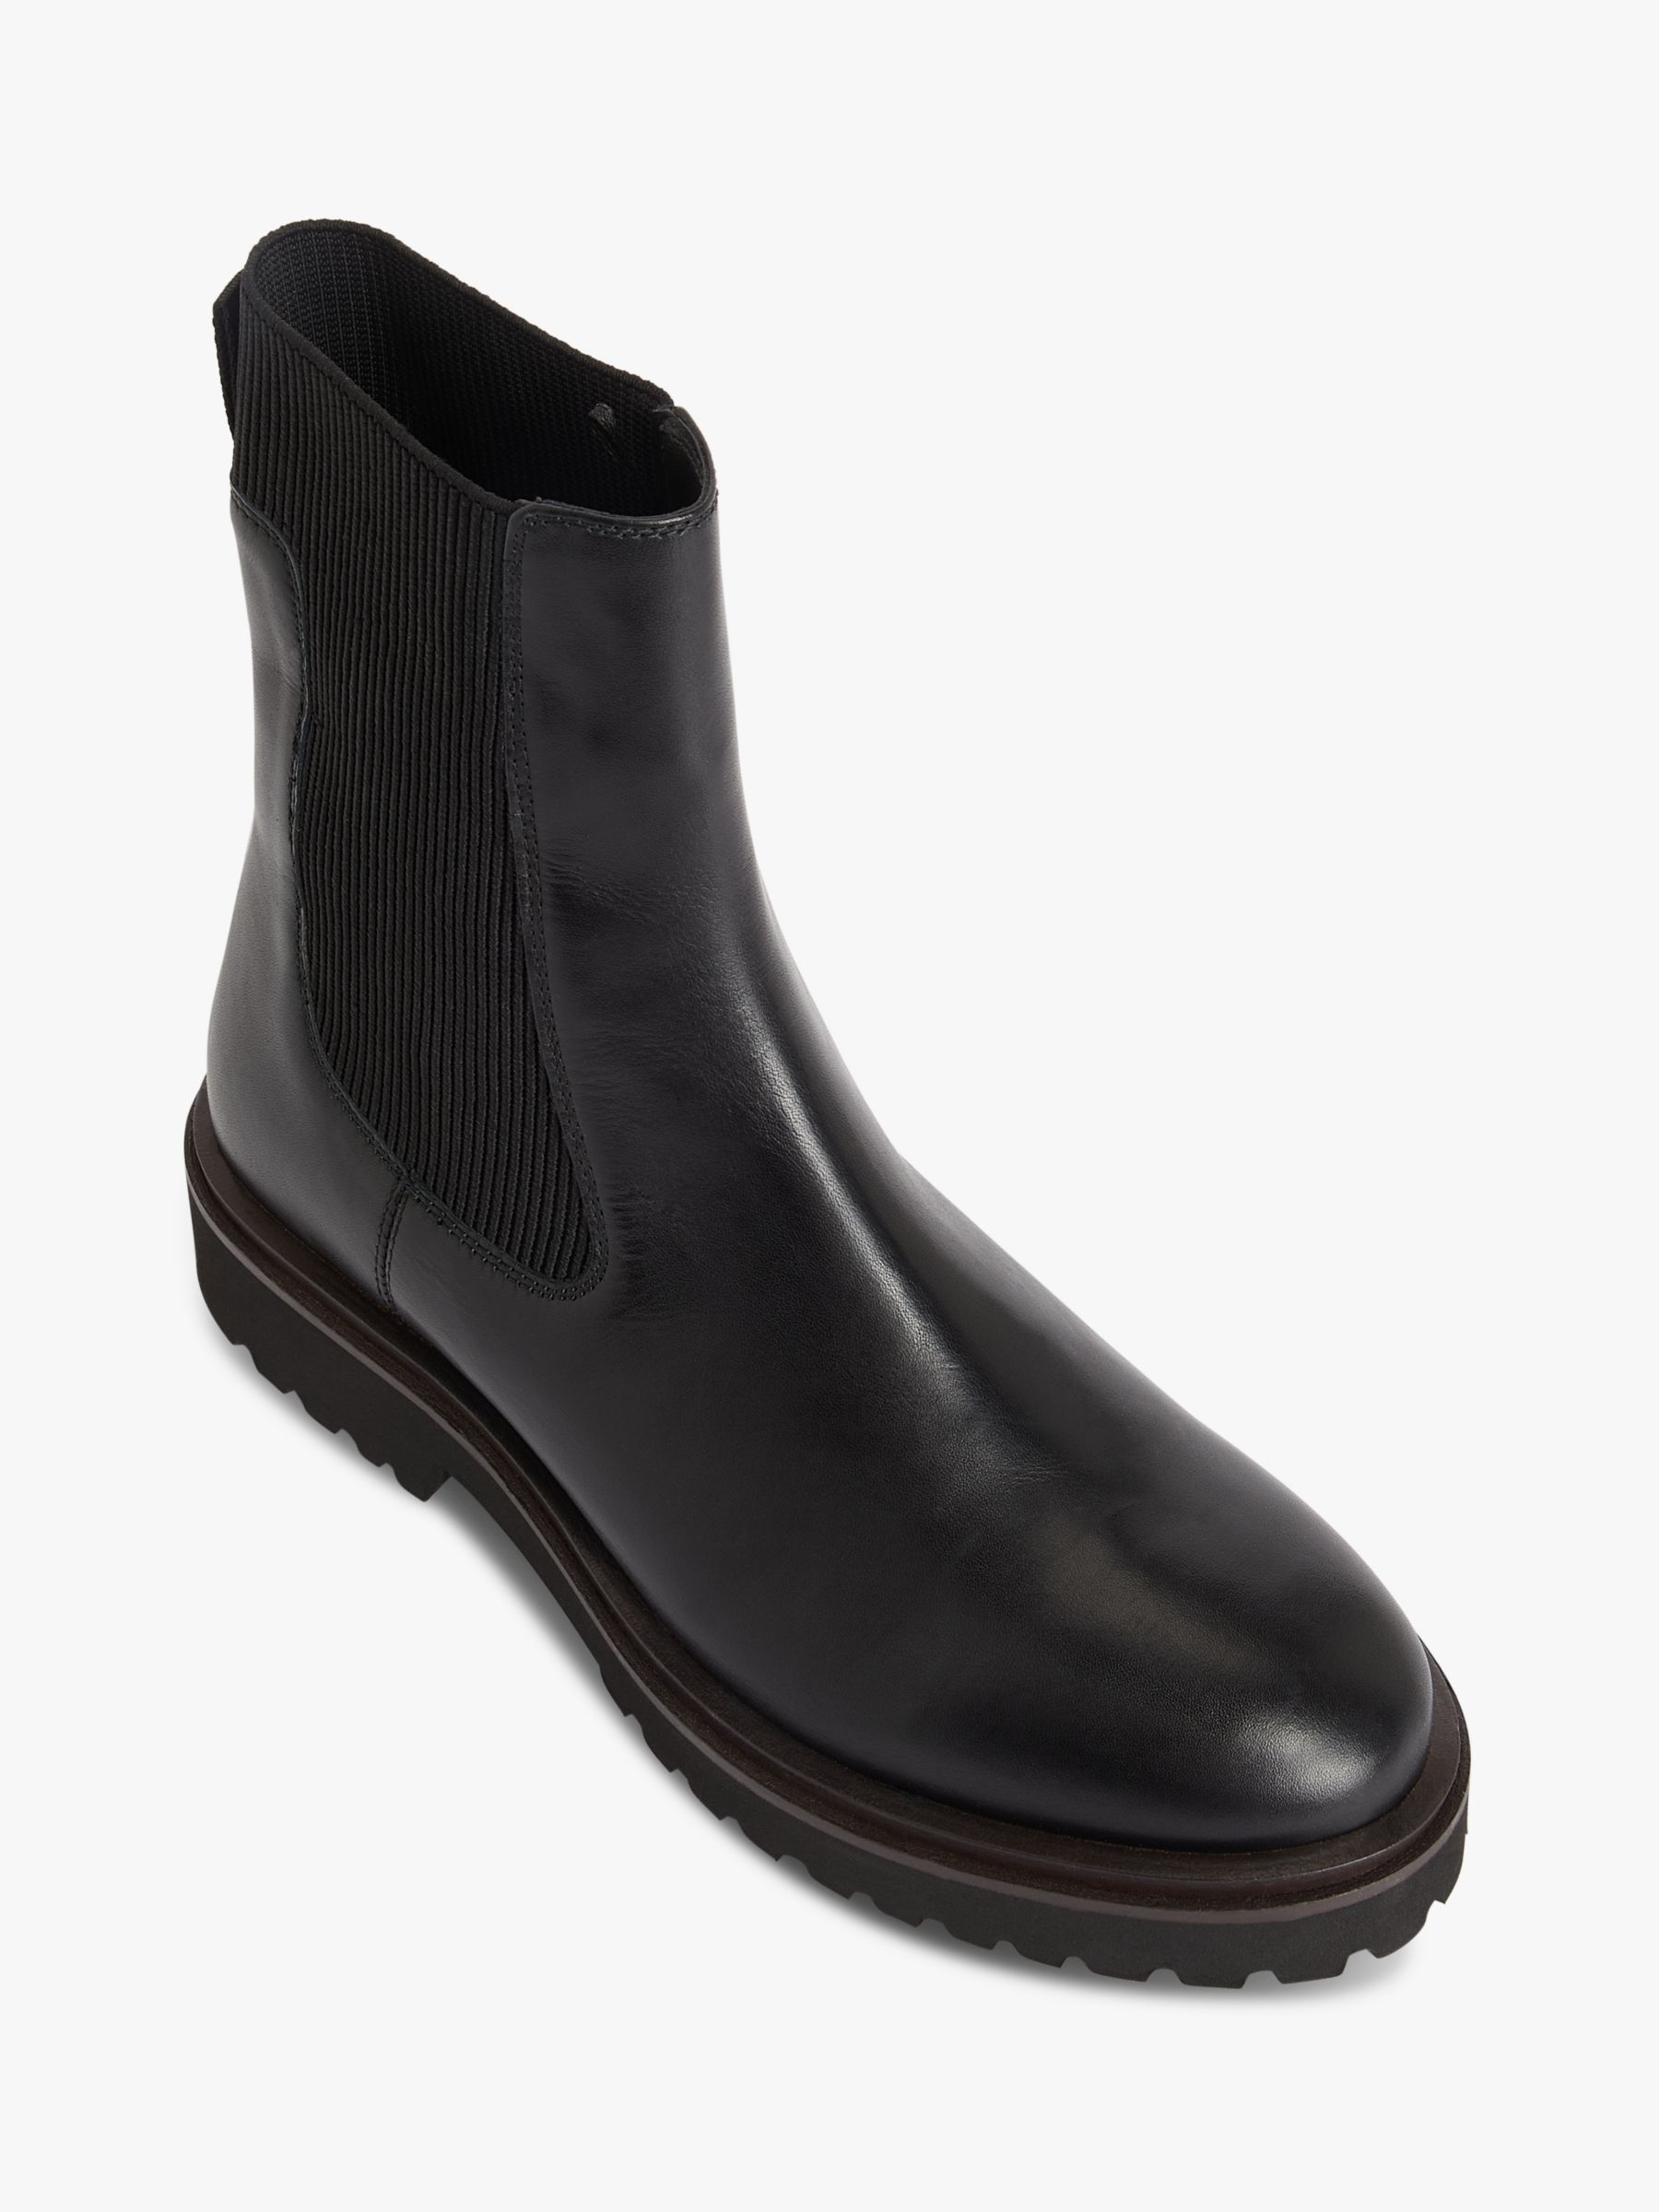 ANYDAY John Lewis & Partners Purcell Leather Chelsea Boots